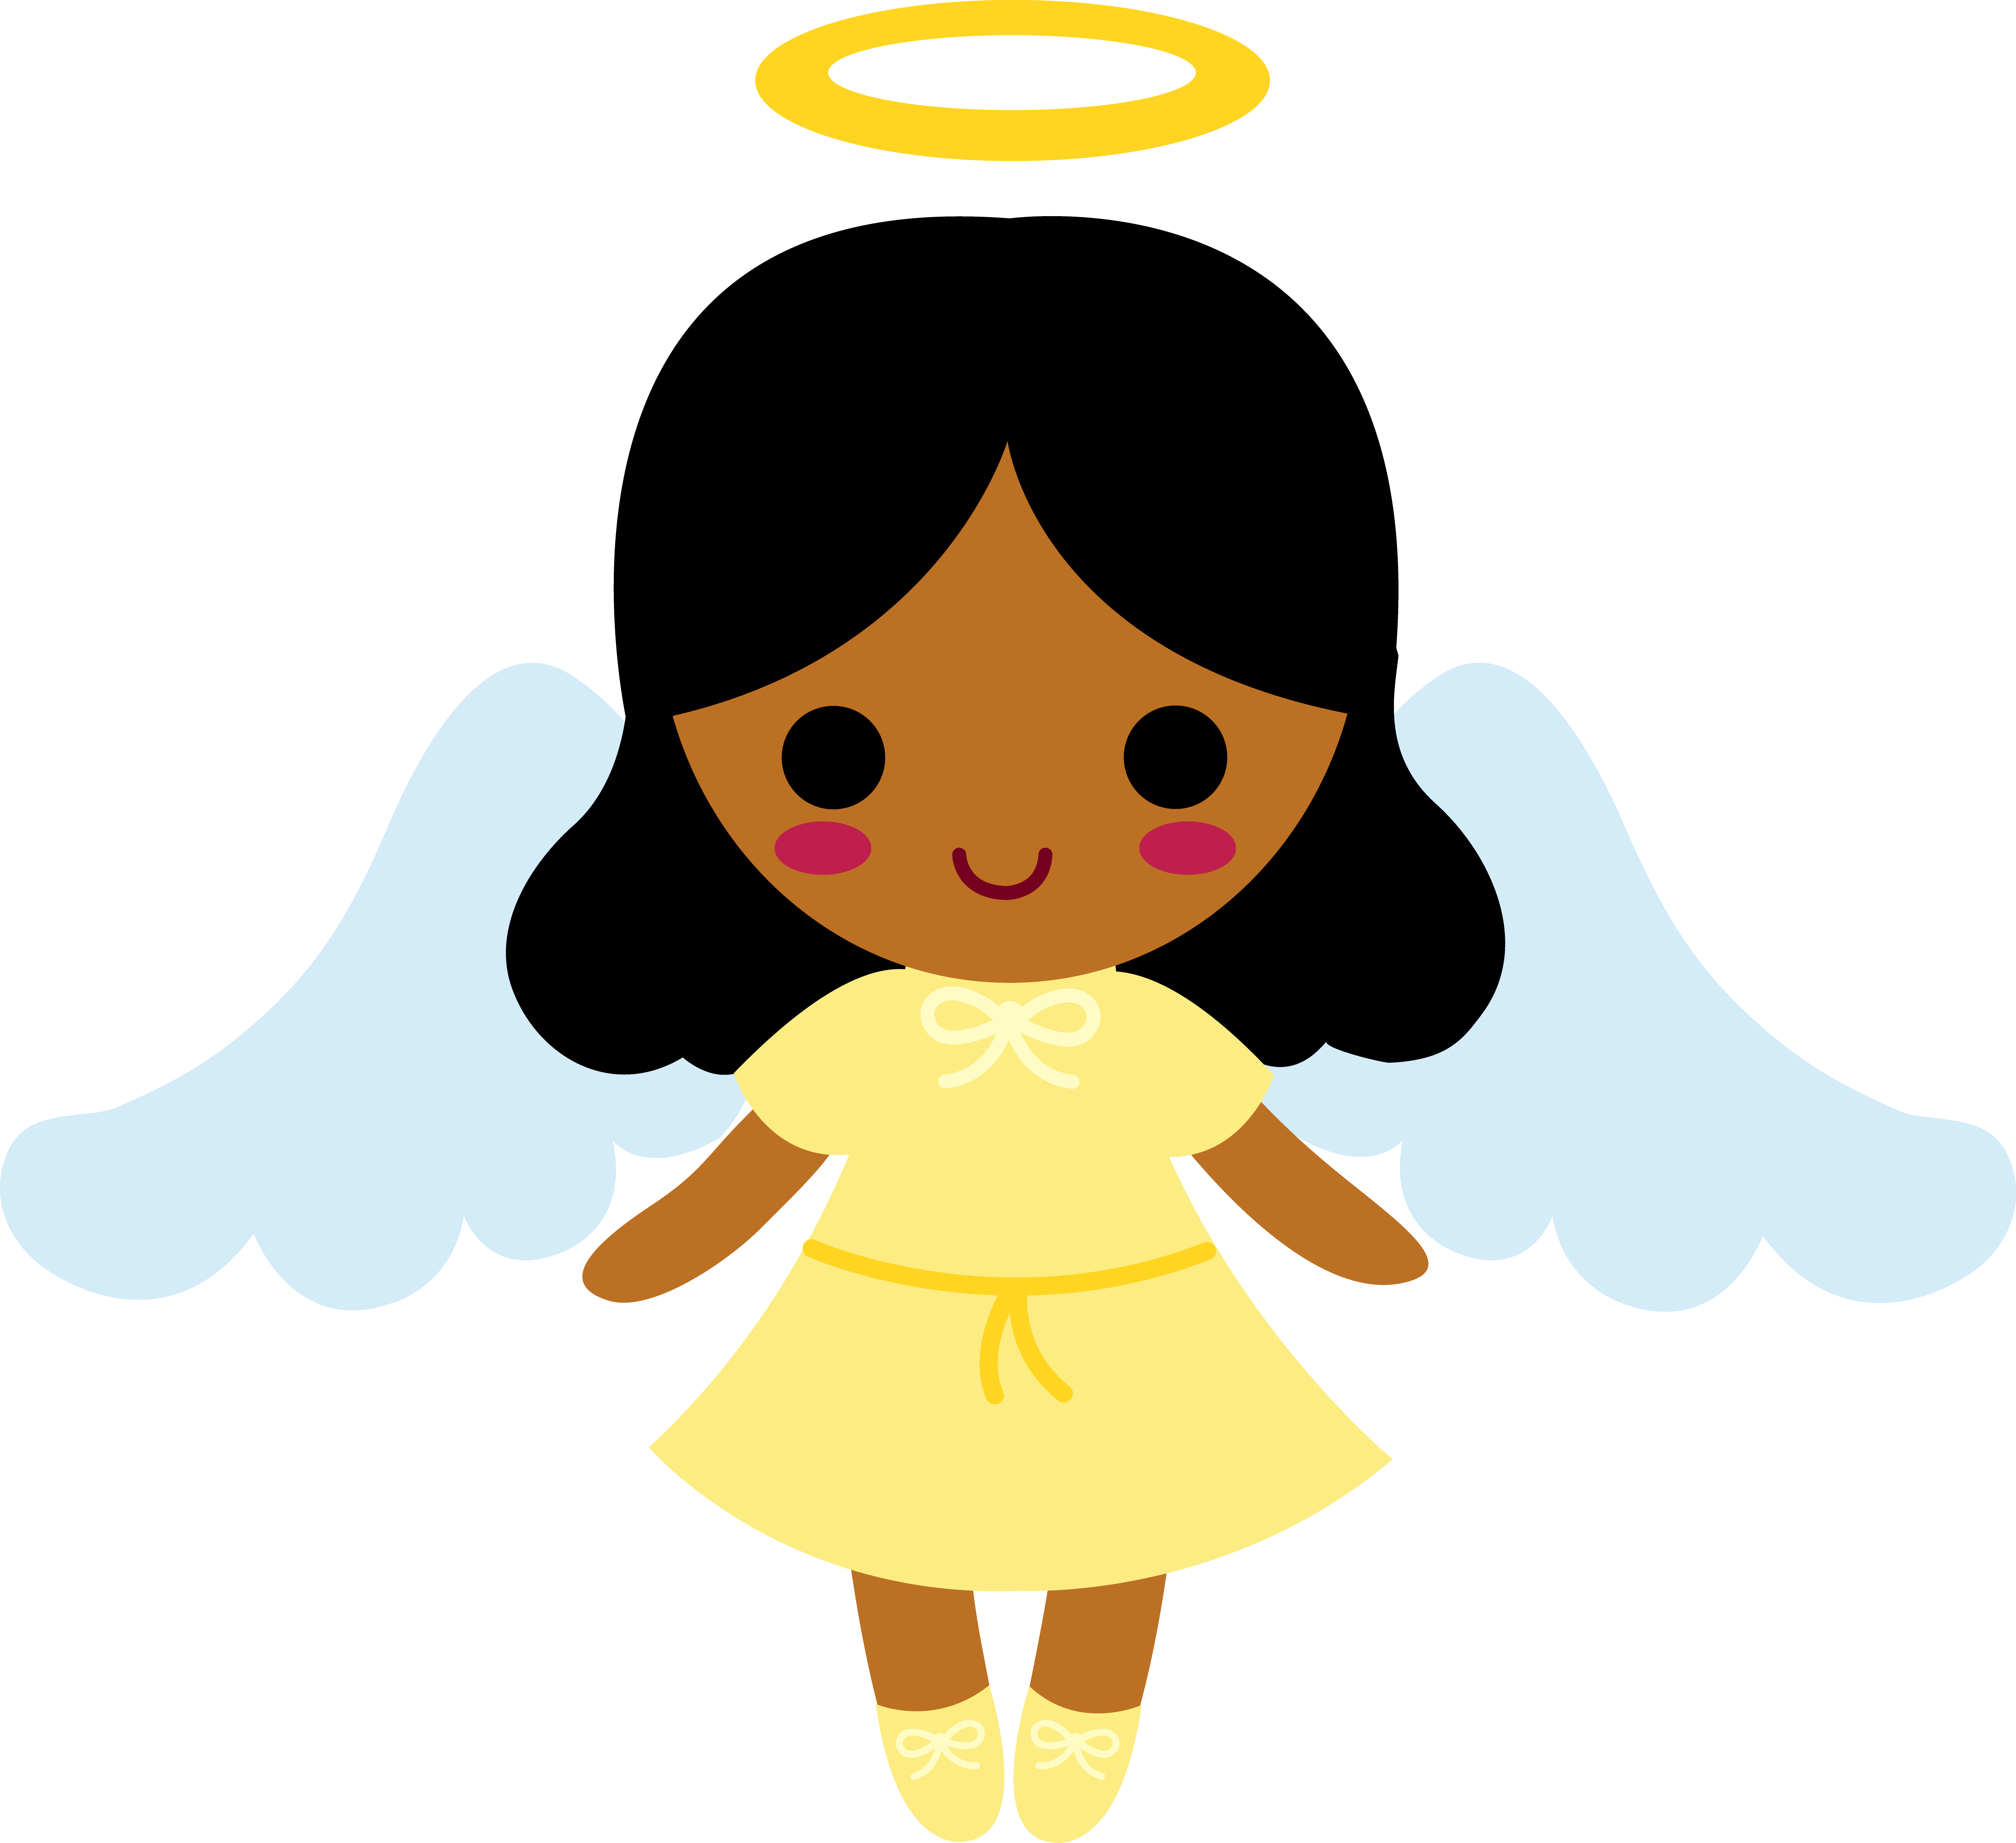 A Cartoon Of A Girl With Wings And Halo